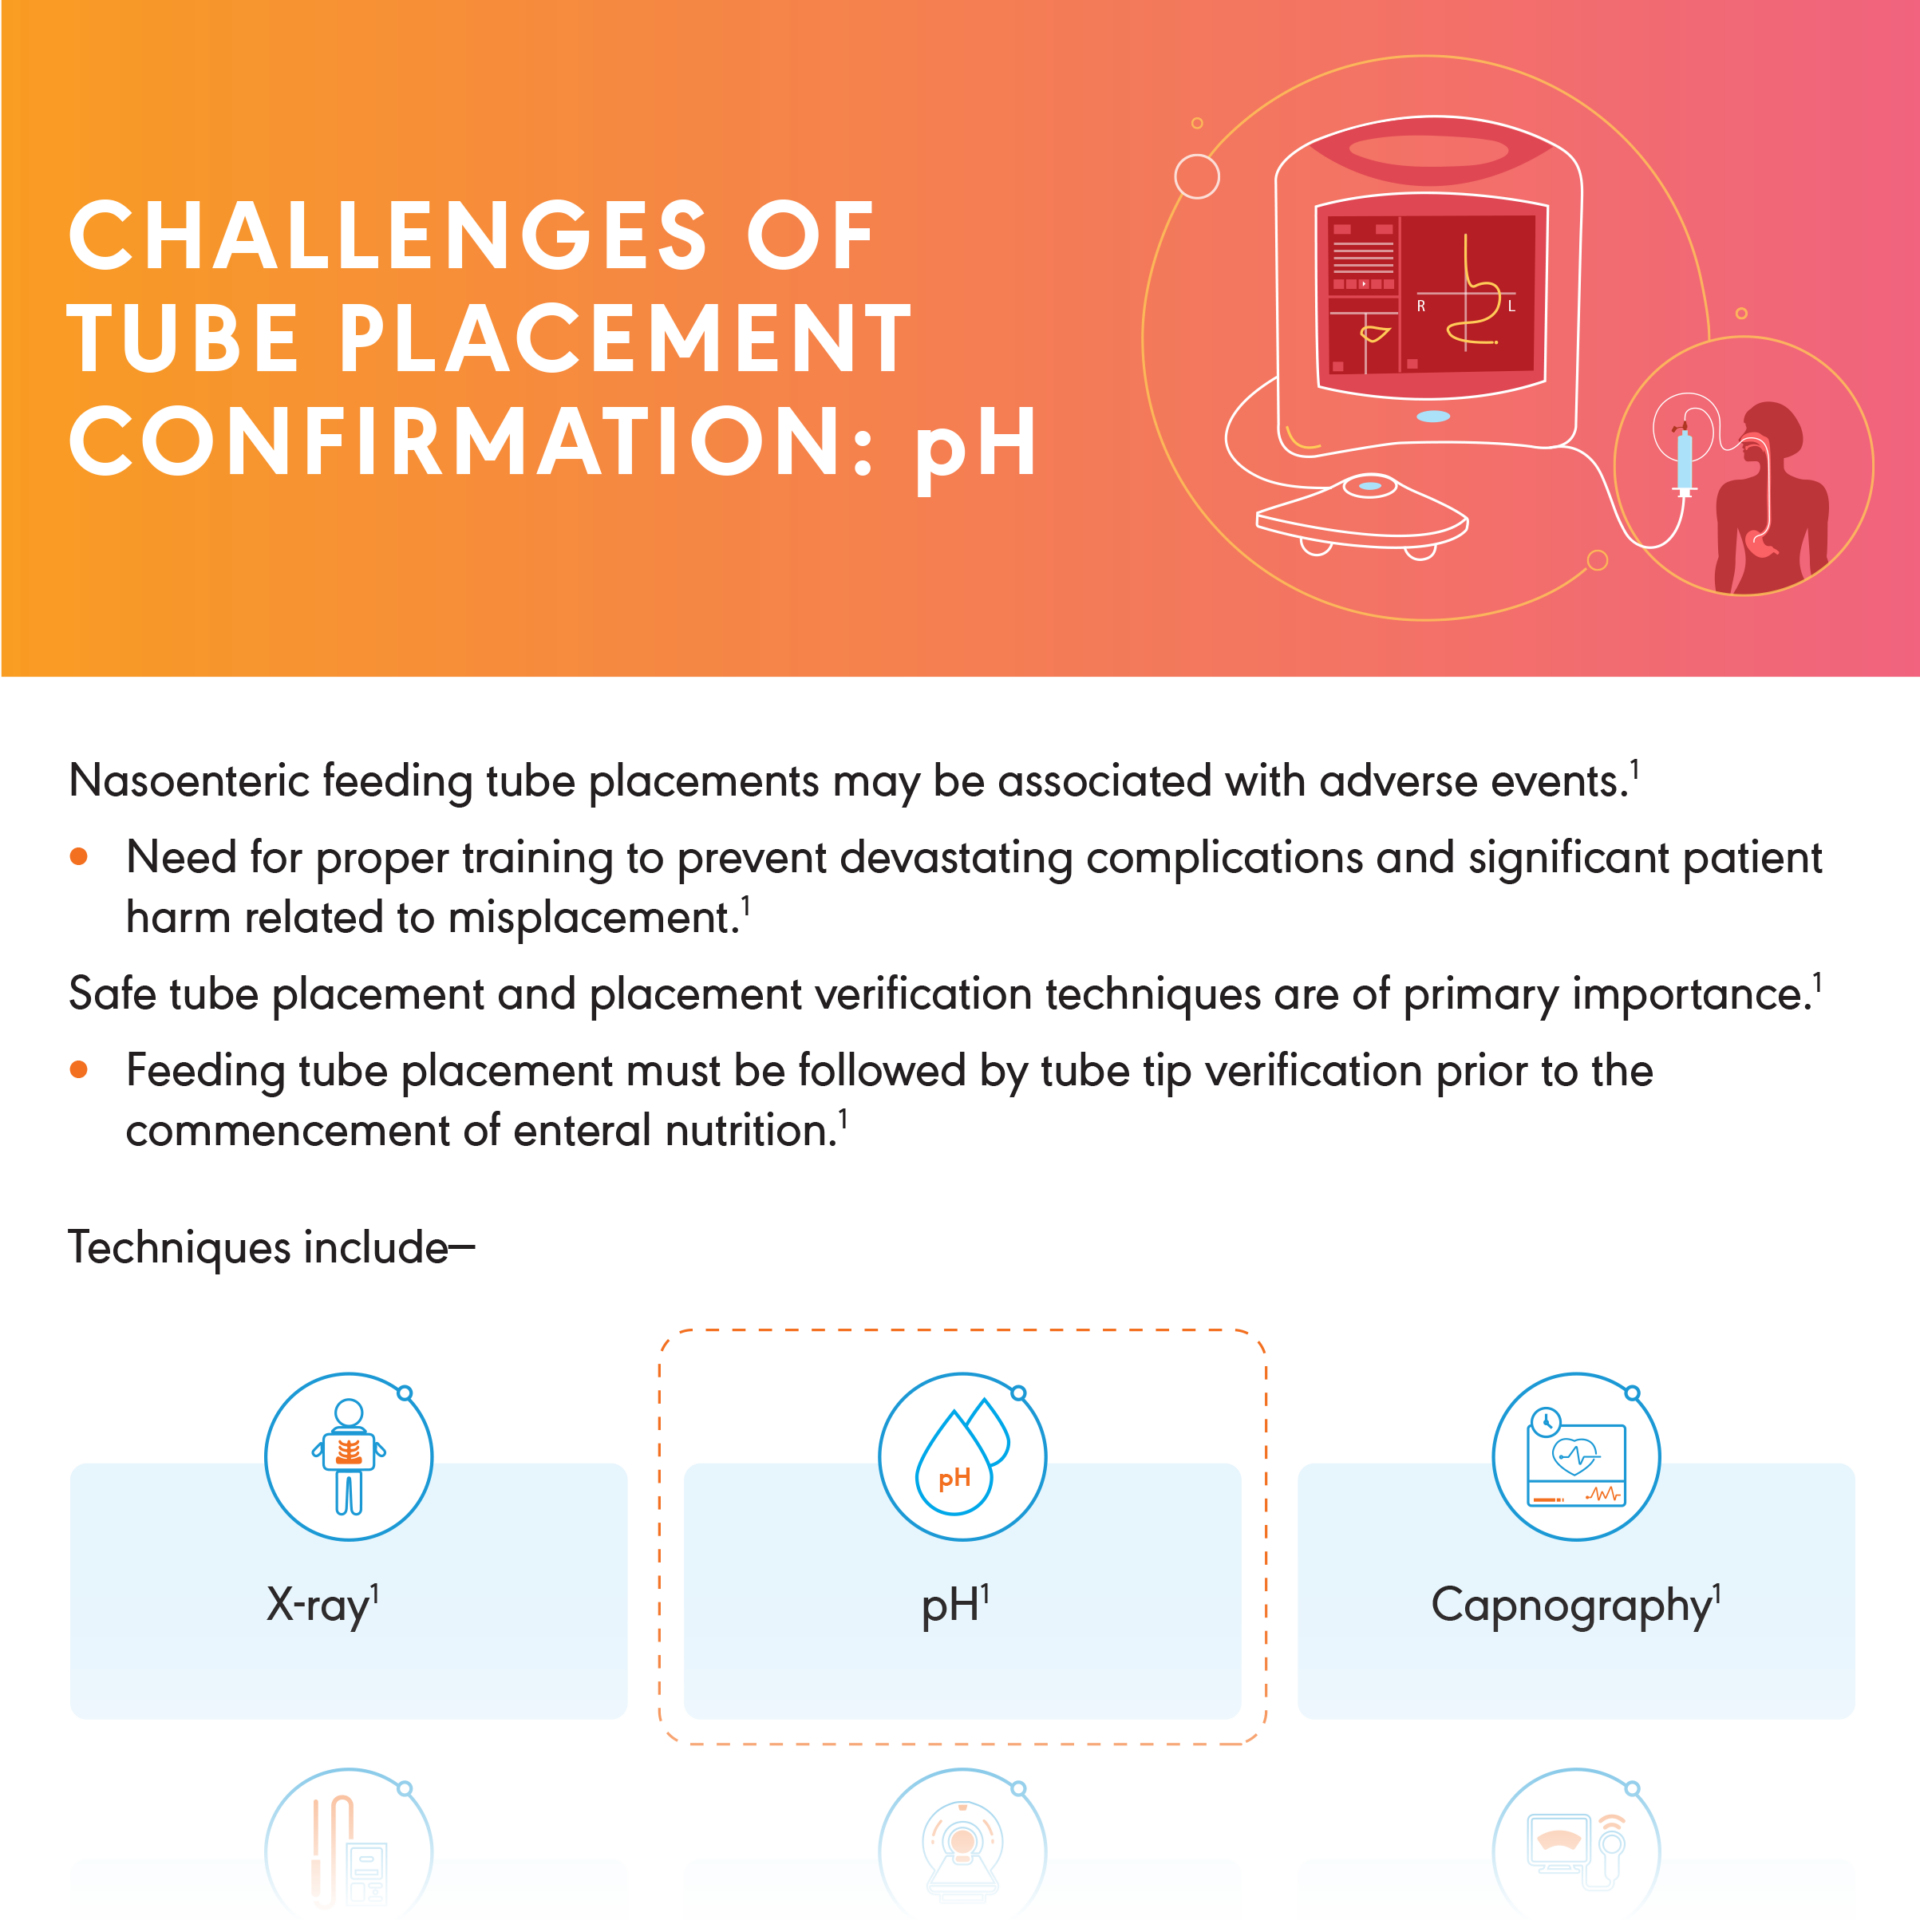 Challenges of Tube Placement Confirmation with pH